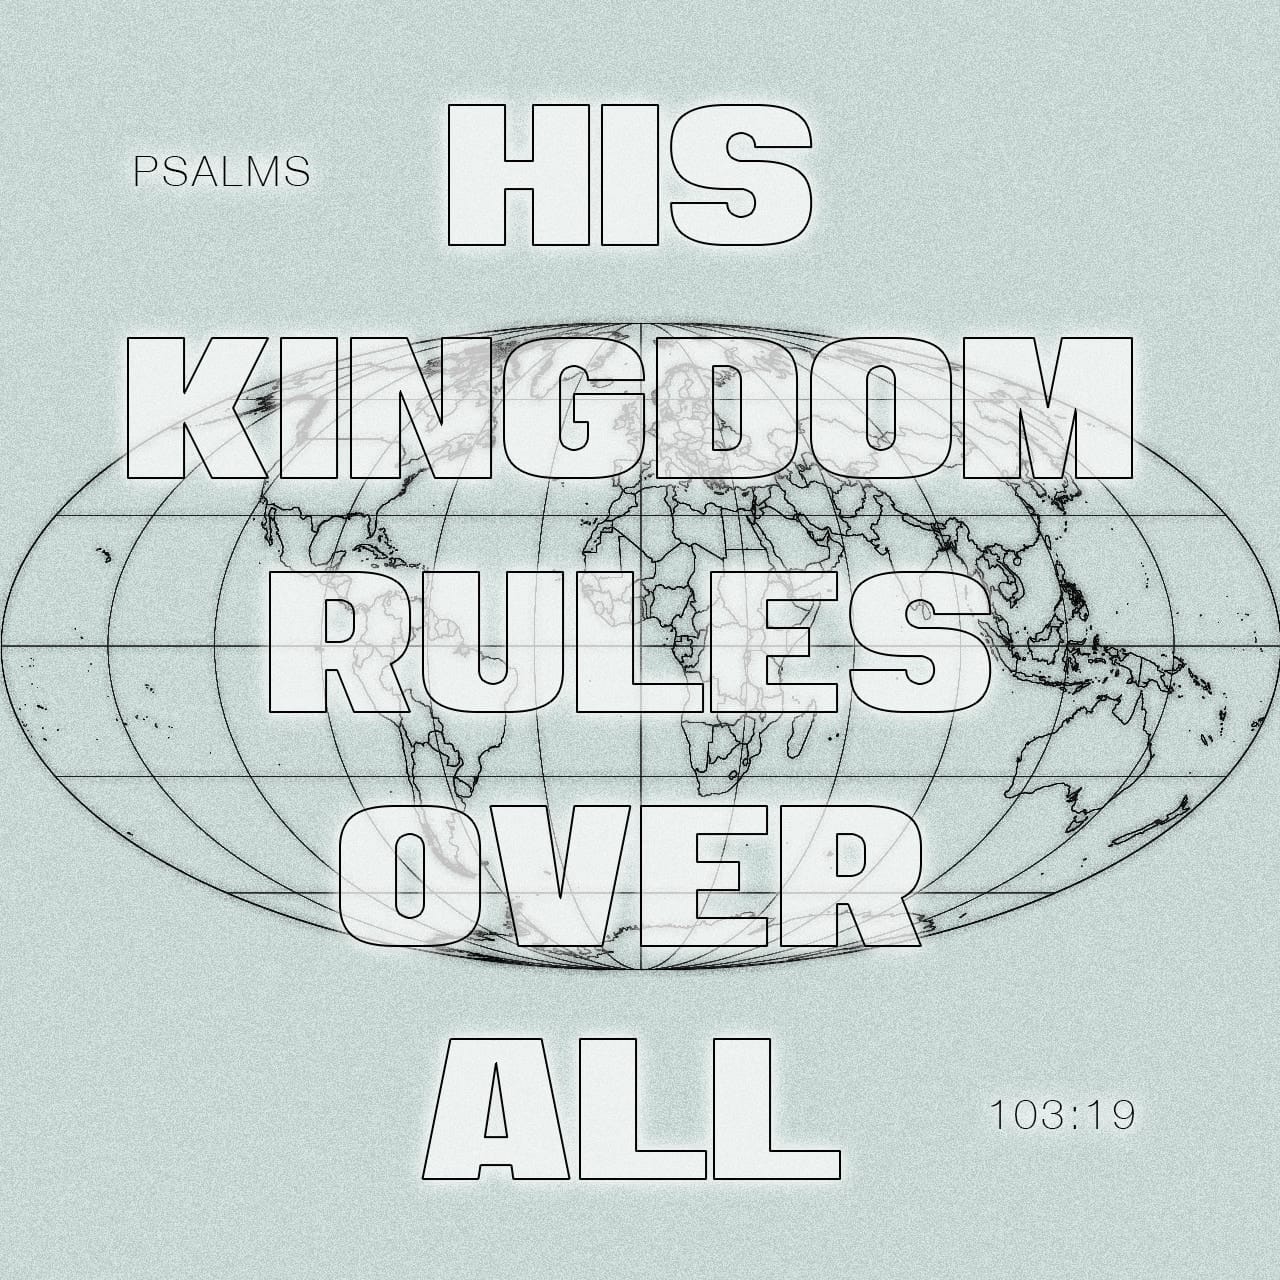 Psalm 103:19 The LORD hath prepared his throne in the heavens;
And his kingdom ruleth over all. | King James Version (KJV) | Download The Bible App Now